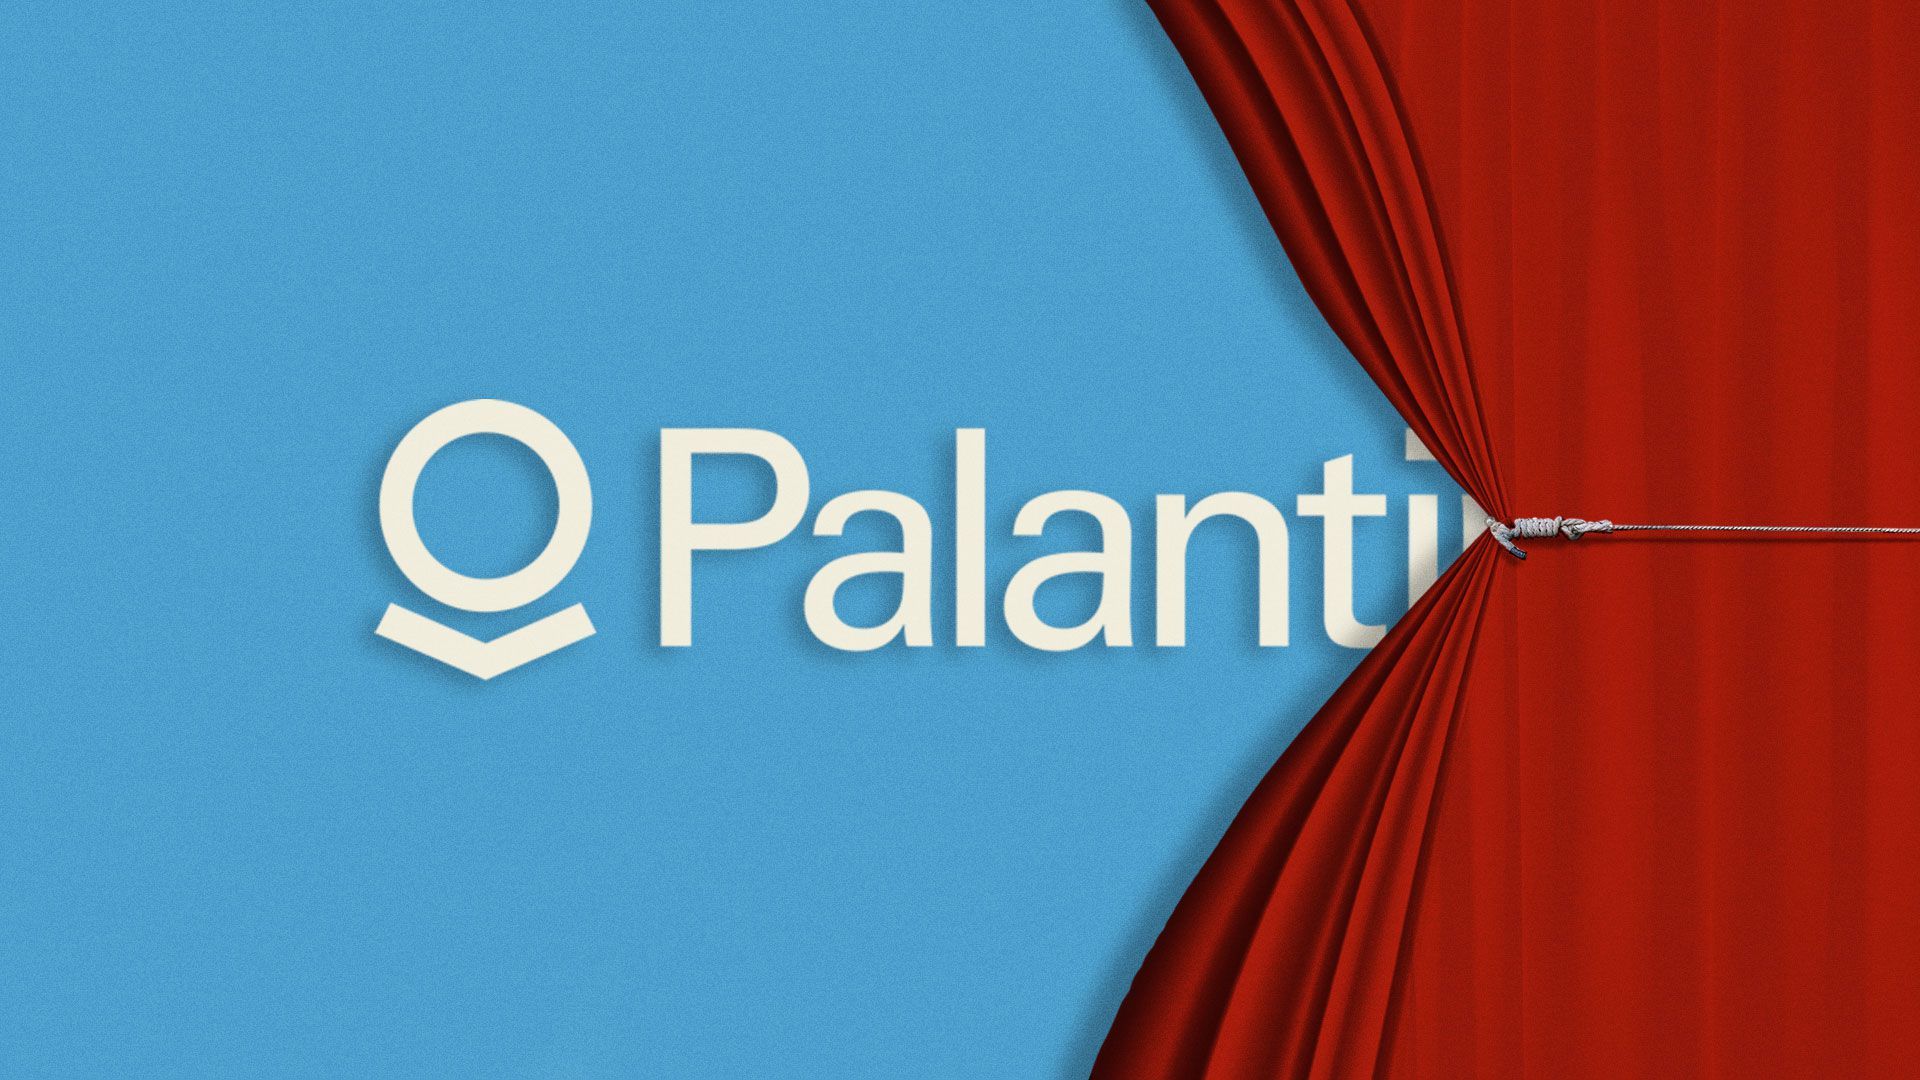 Illustration of Palantir logo being revealed by a curtain